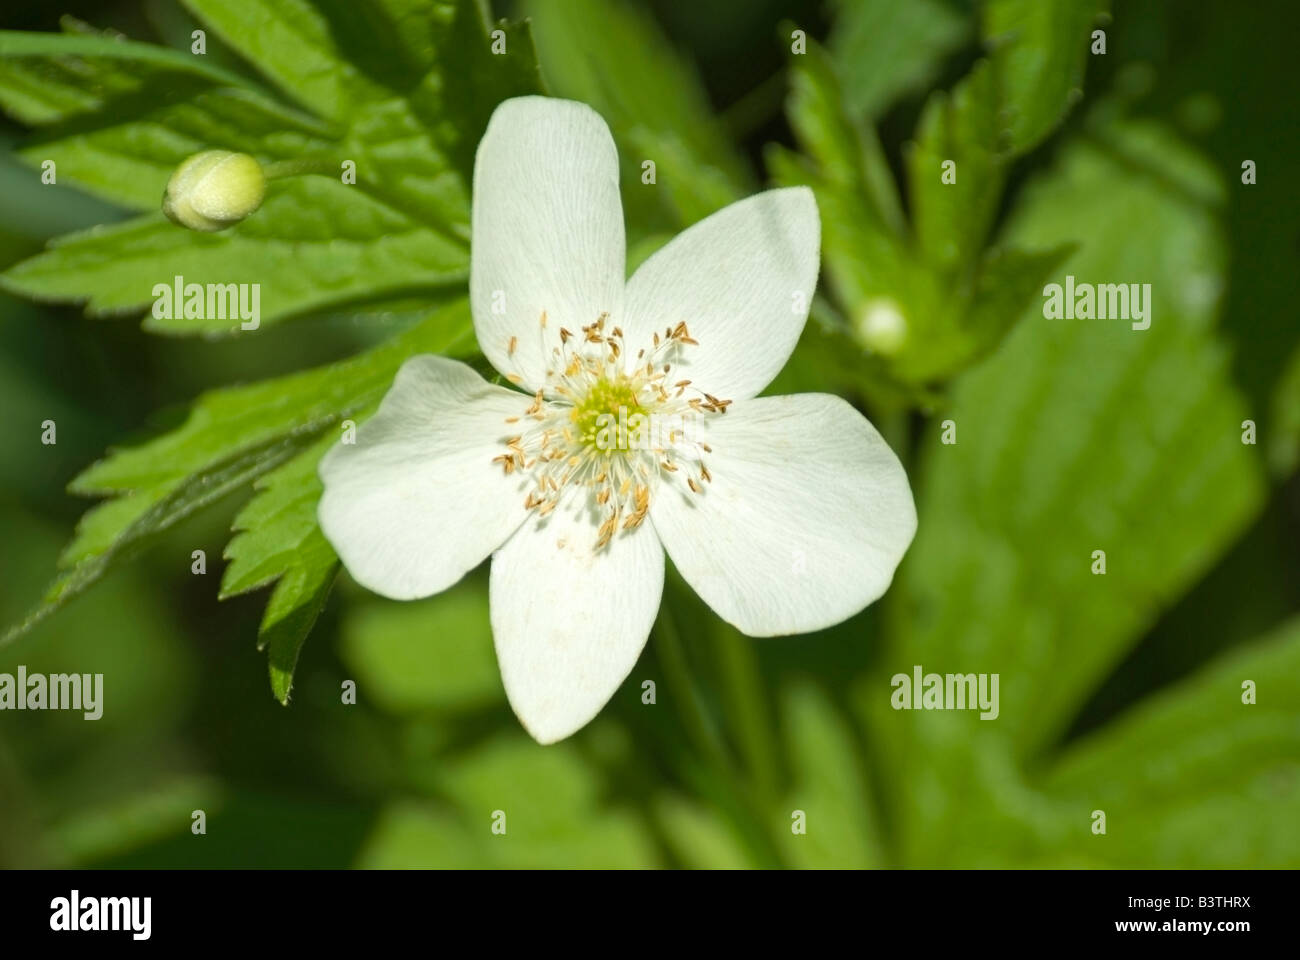 Canada Anemone flower and bud Anemone Canadensis Stock Photo